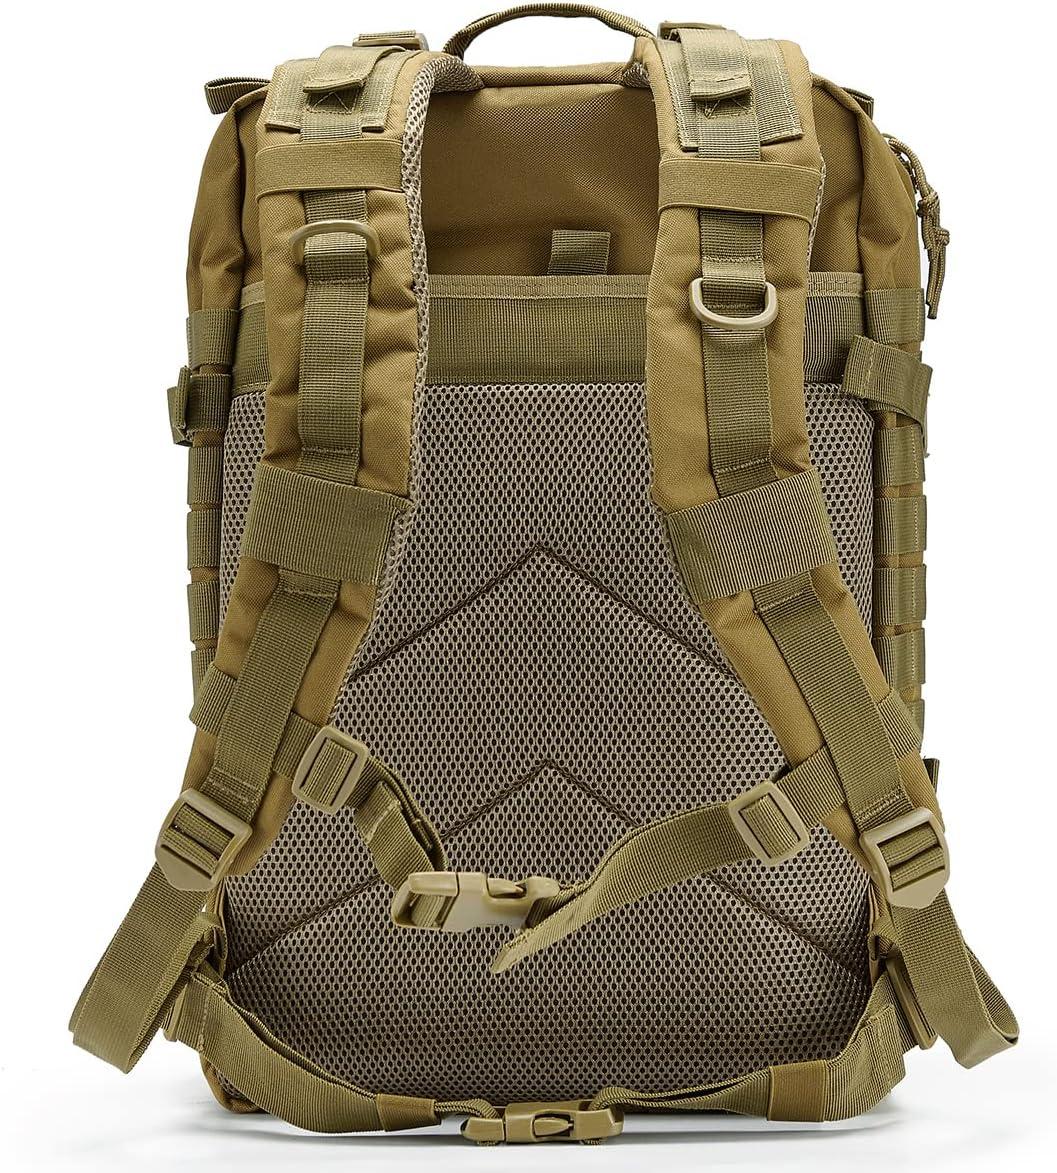 45L Outdoor Tactical Backpack Molle Military Bag Rucksack for Hiking Camping